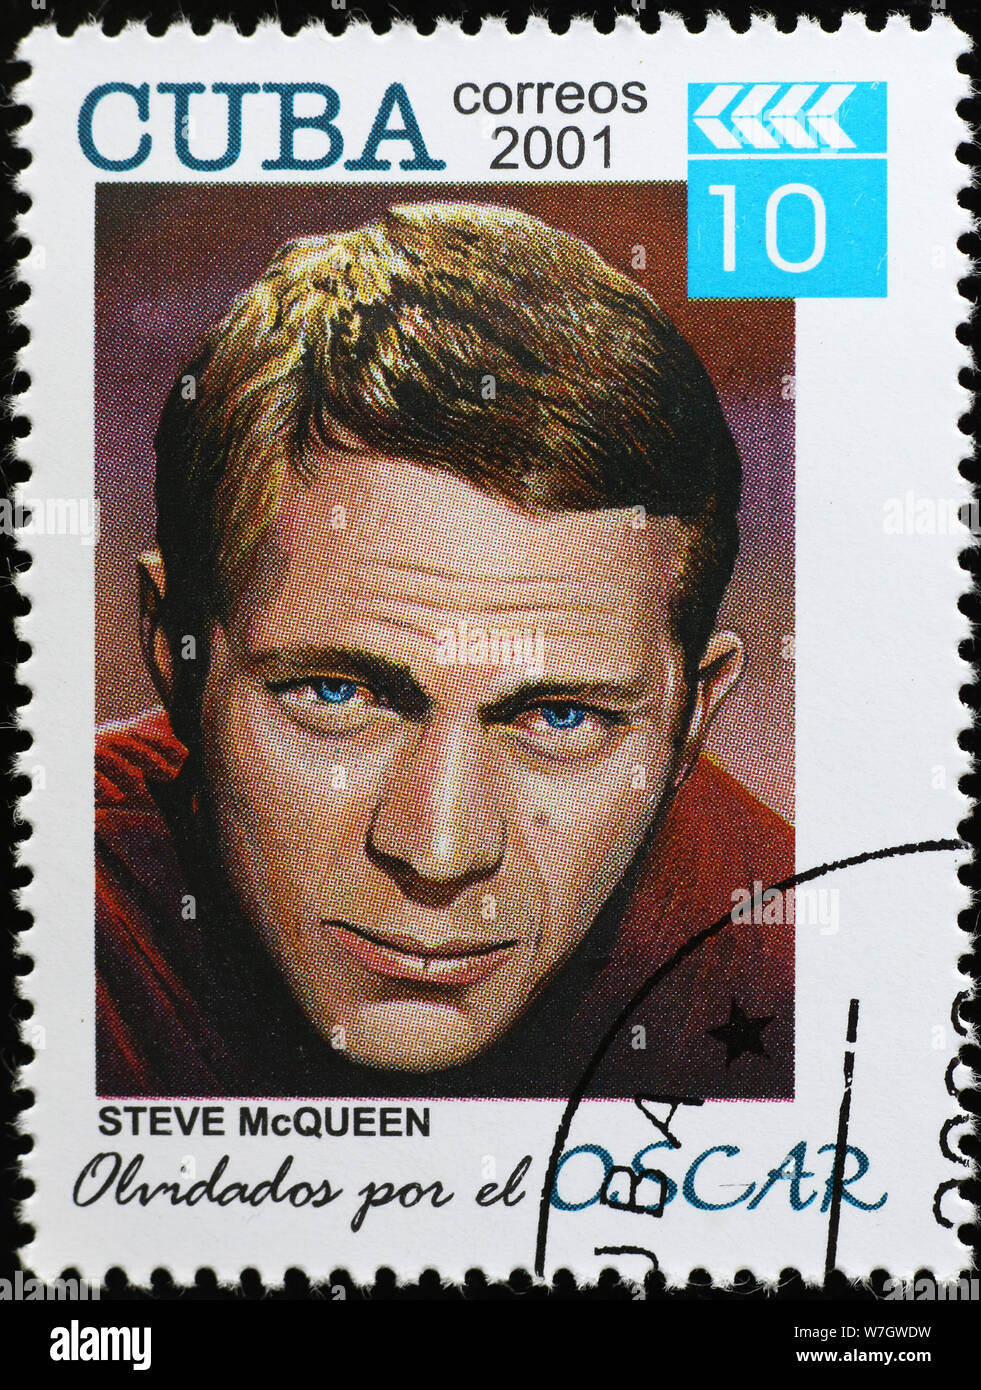 Steve McQueen on cuban postage stamp Stock Photo